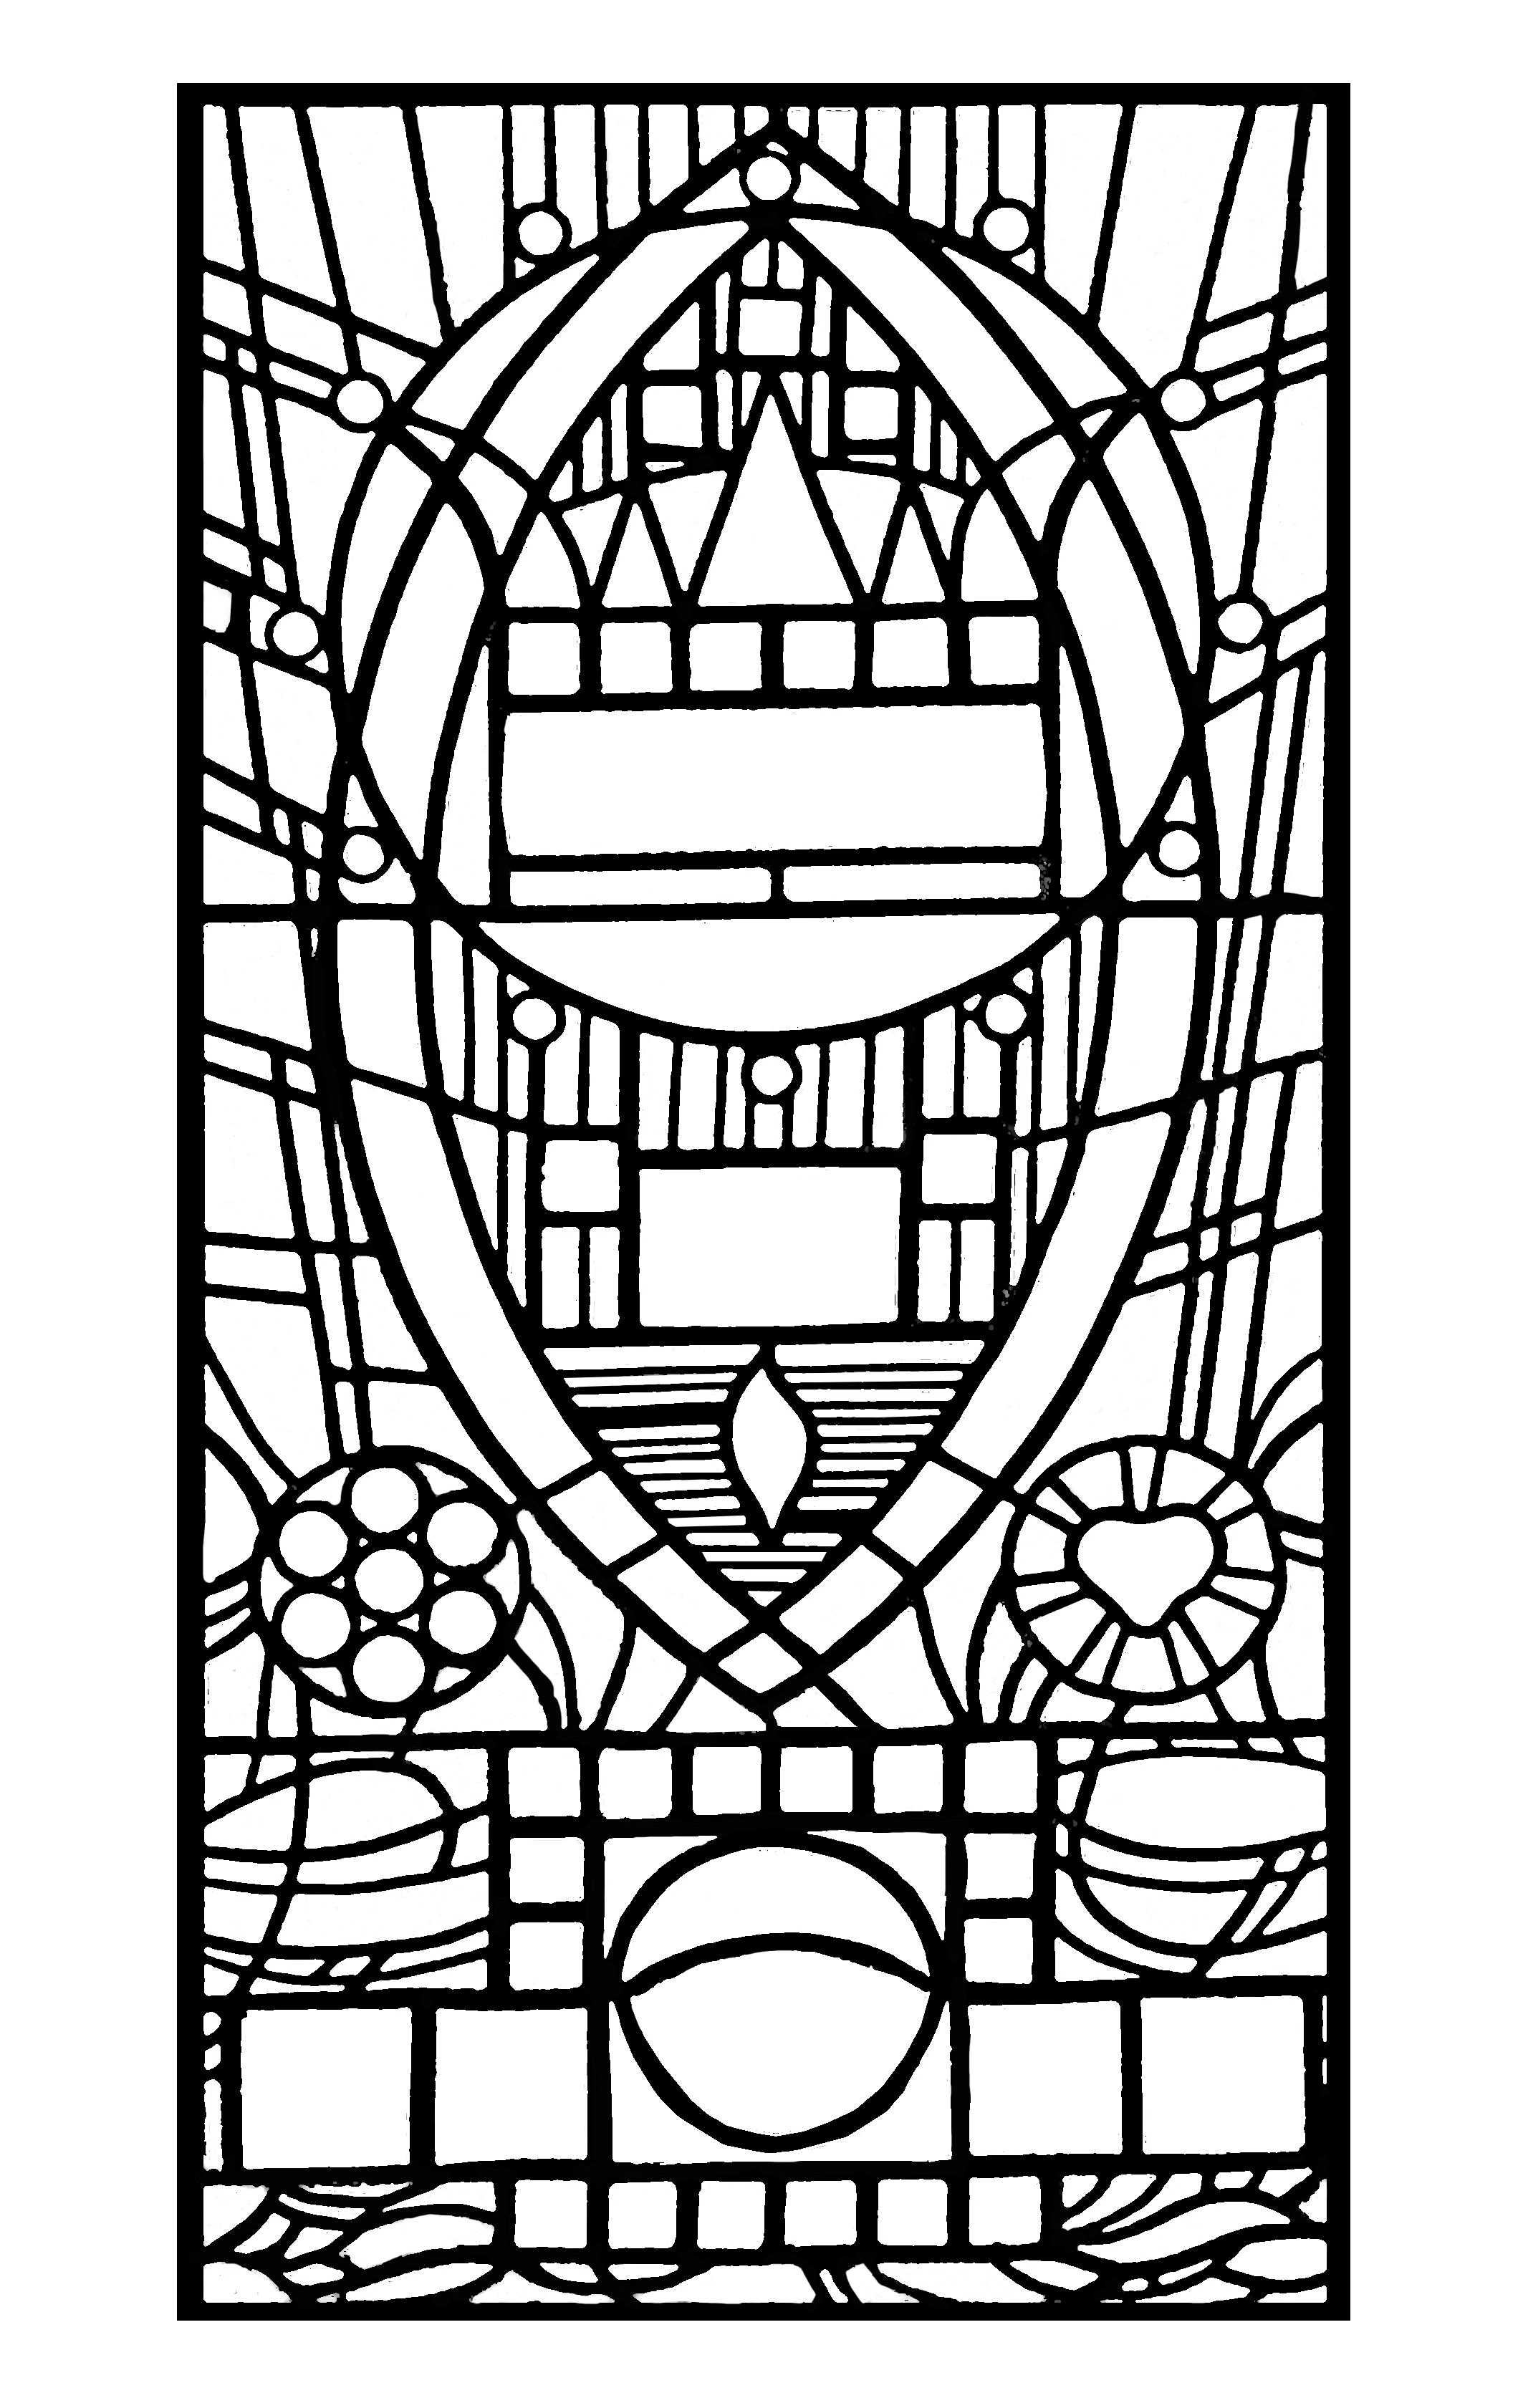 Coloring page made from a modern Stained glass : 'L'apparition bleue', Church of Edegem in France